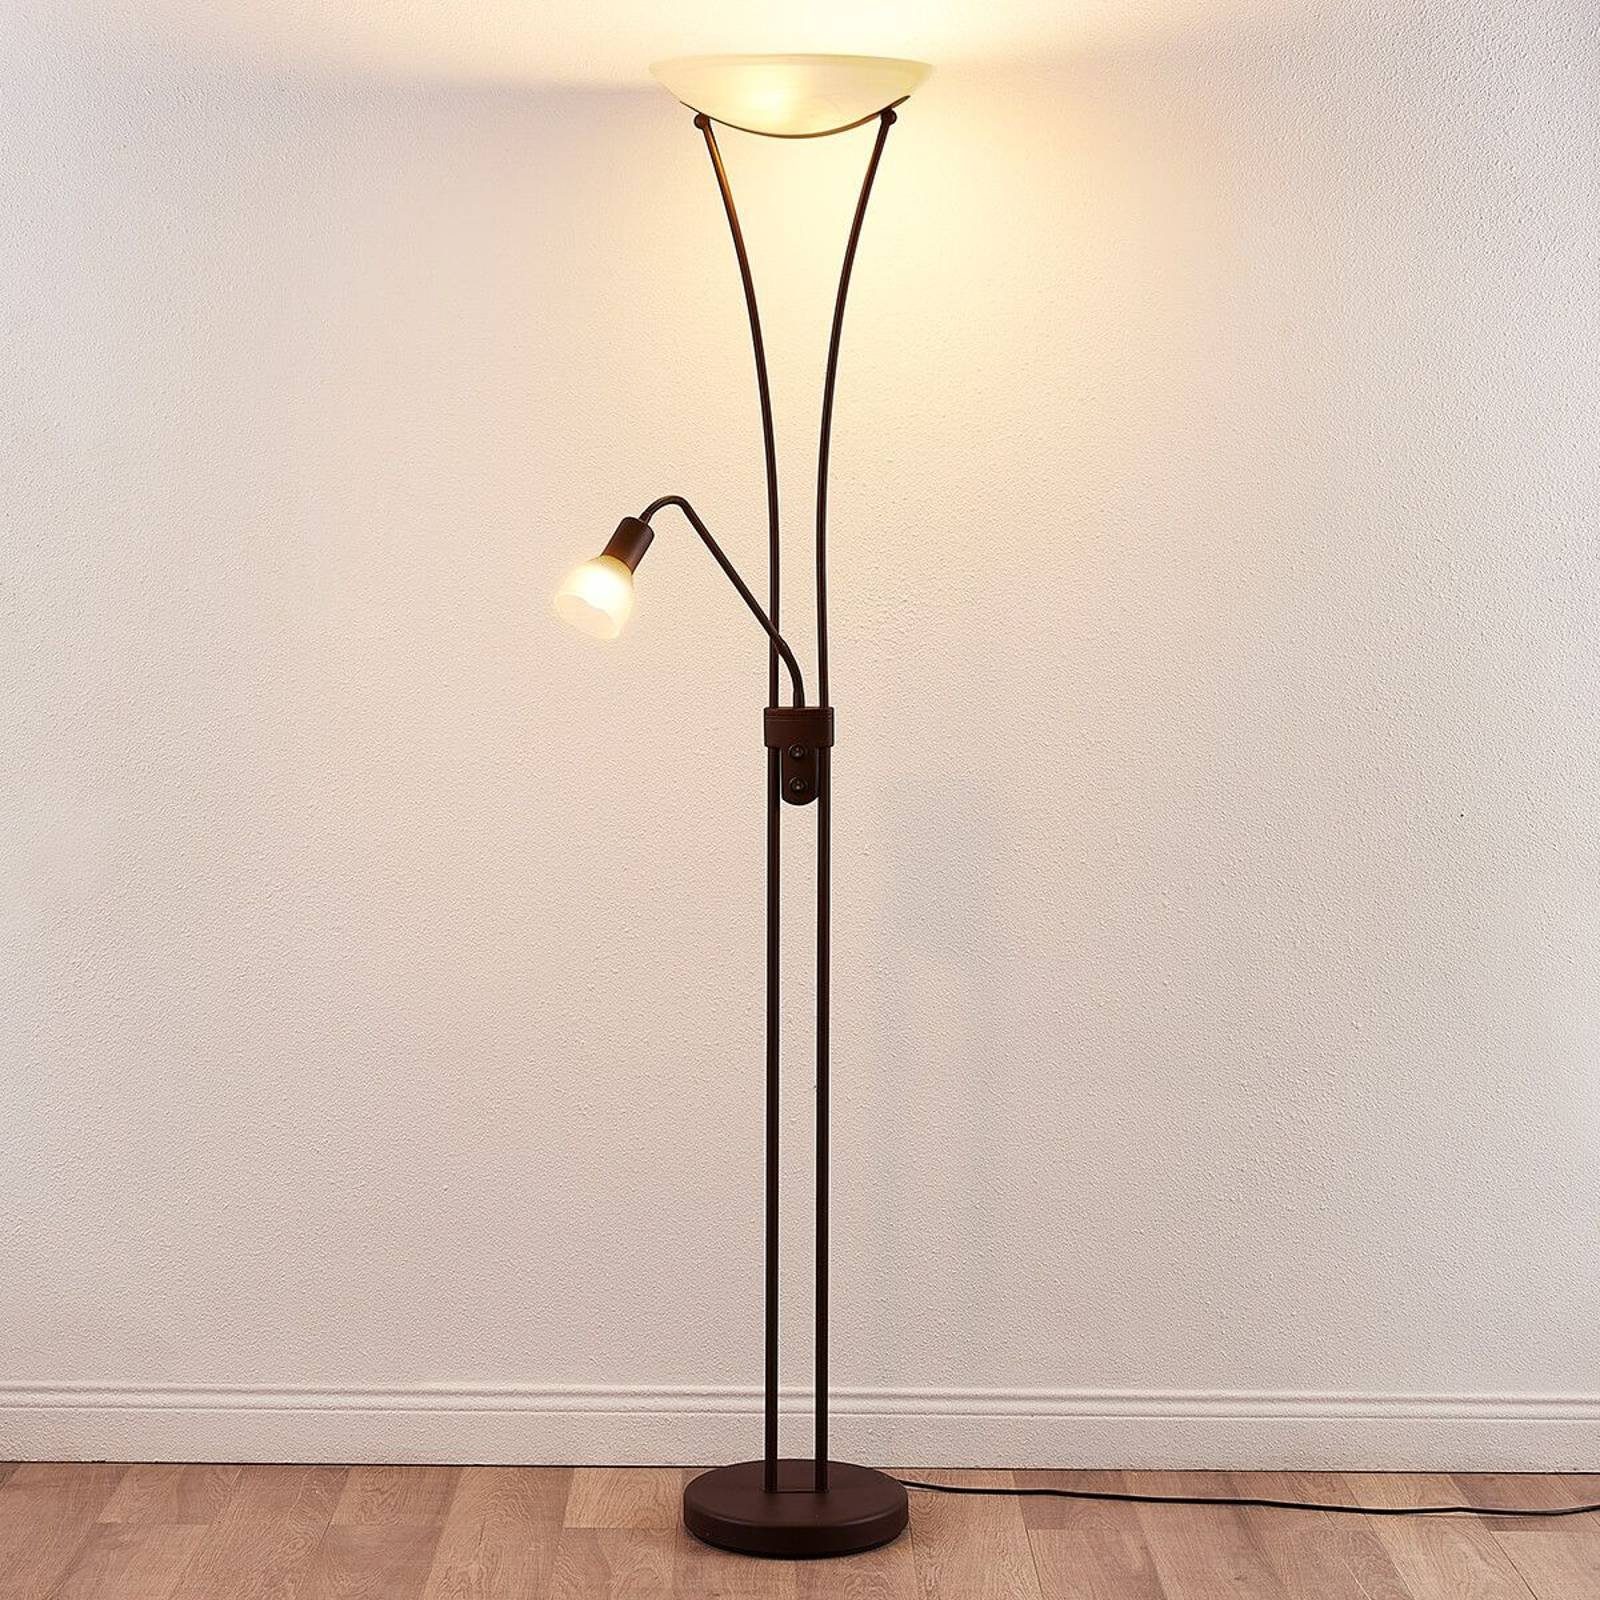 Lindby Stehlampe Felicia, dimmbar, 3 Glas, amber, Leuchtmittel Landhaus E27 inklusive, Metall, Rustikal, / flammig, rost, nicht